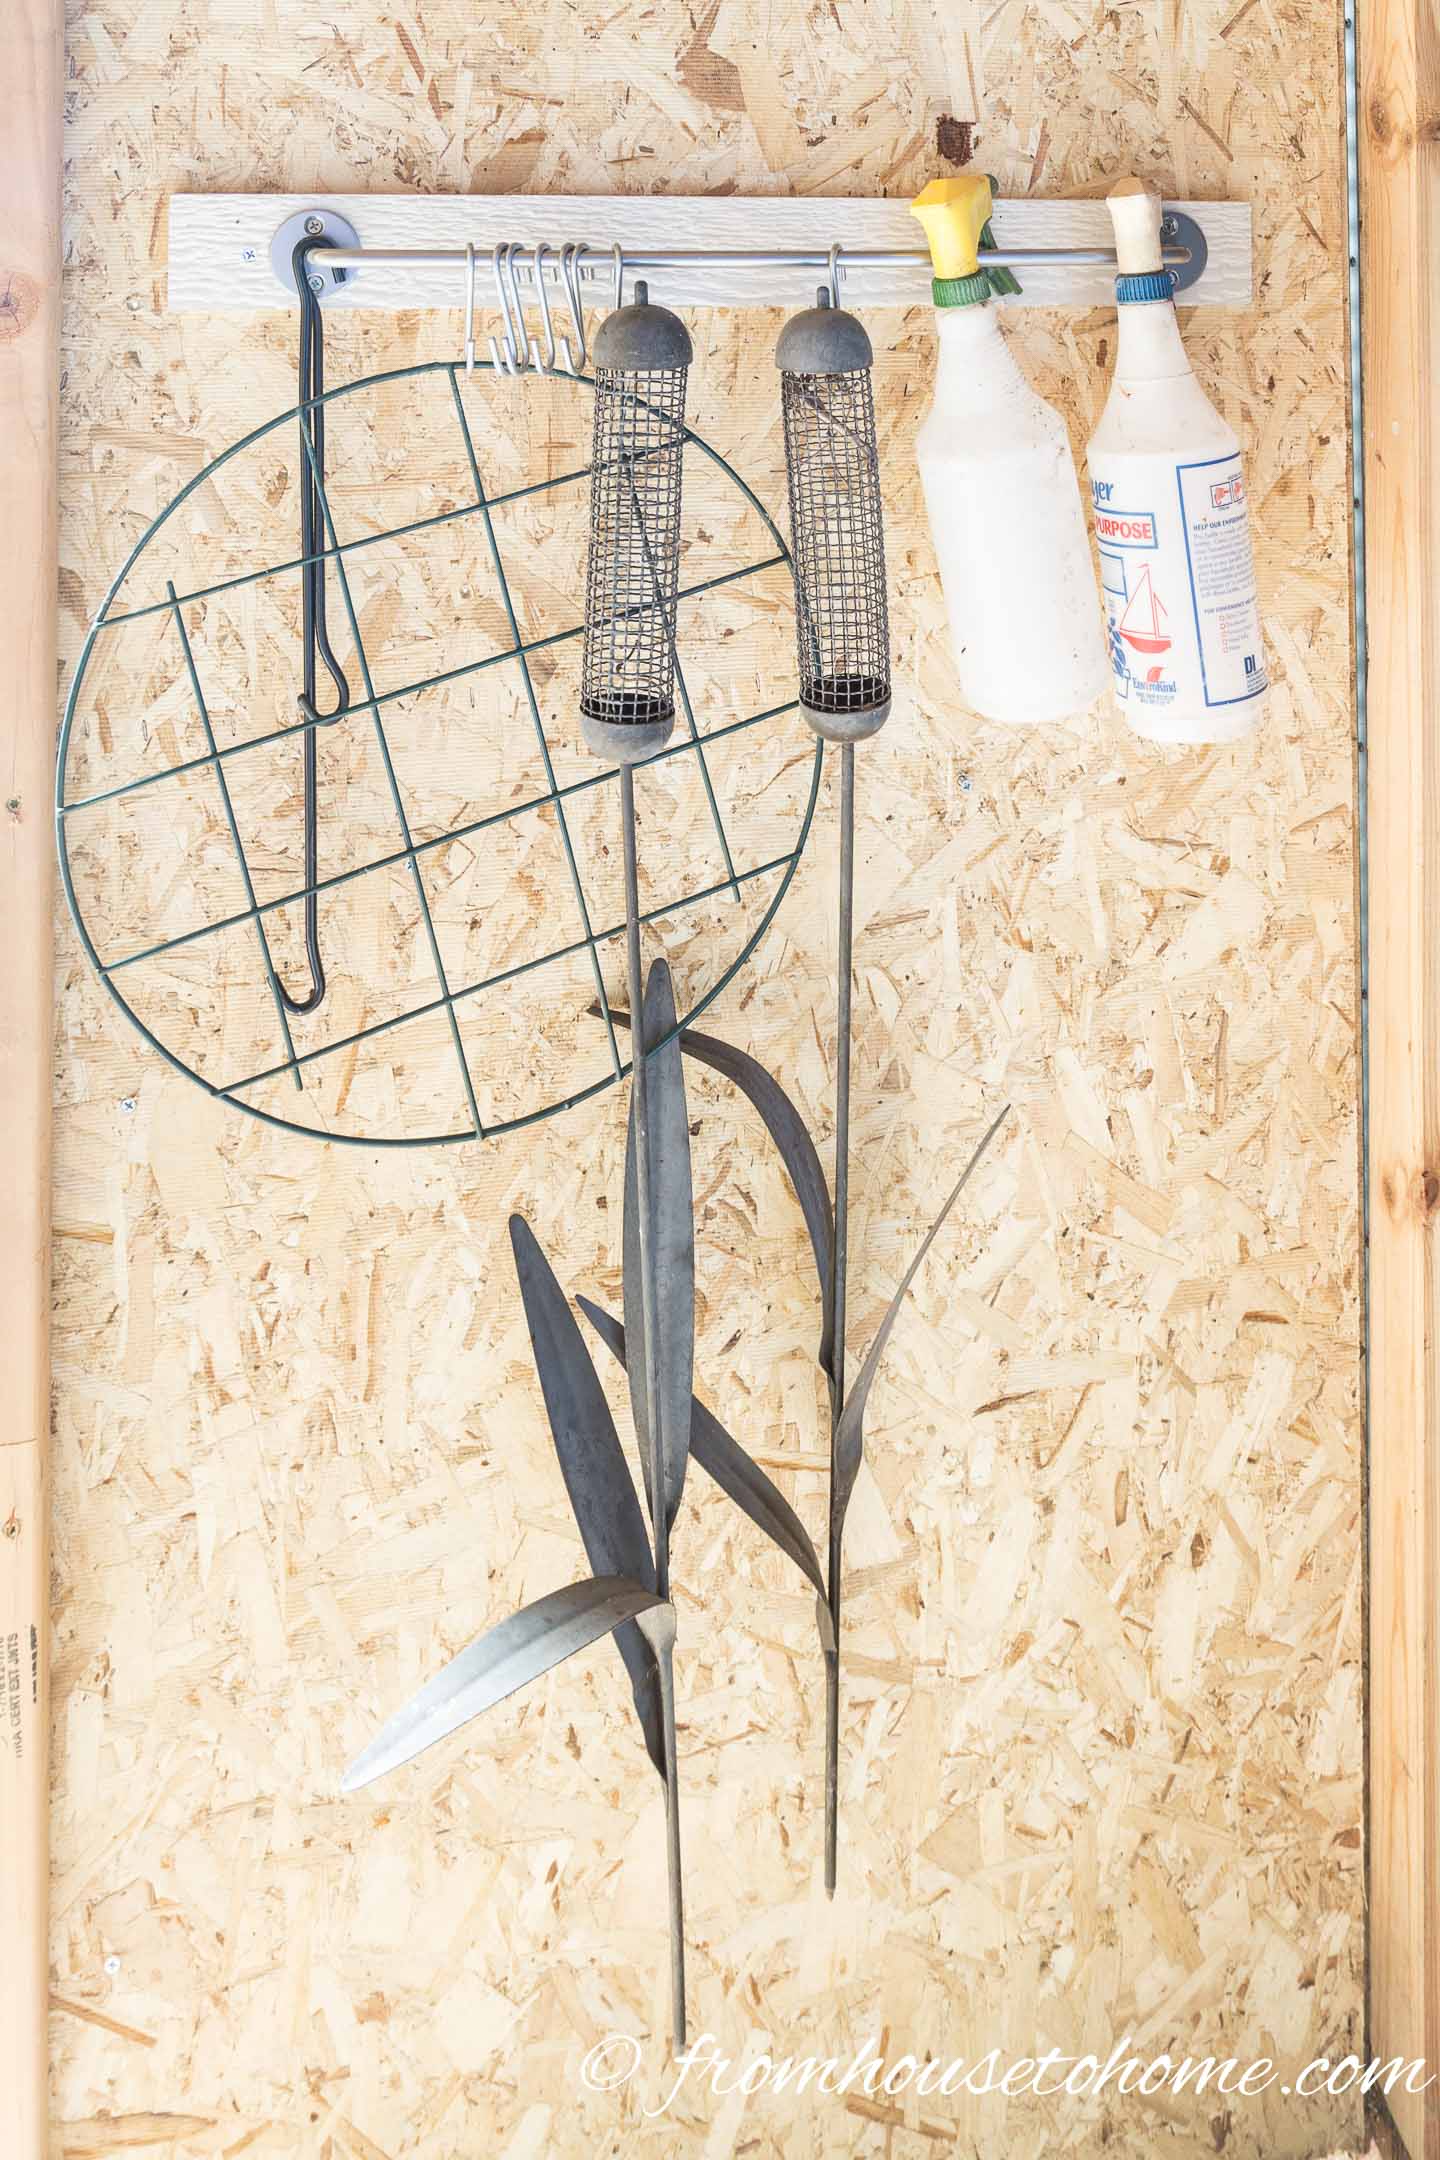 Bird feeders, spray bottles and flower cages hanging from a kitchen rod in a shed